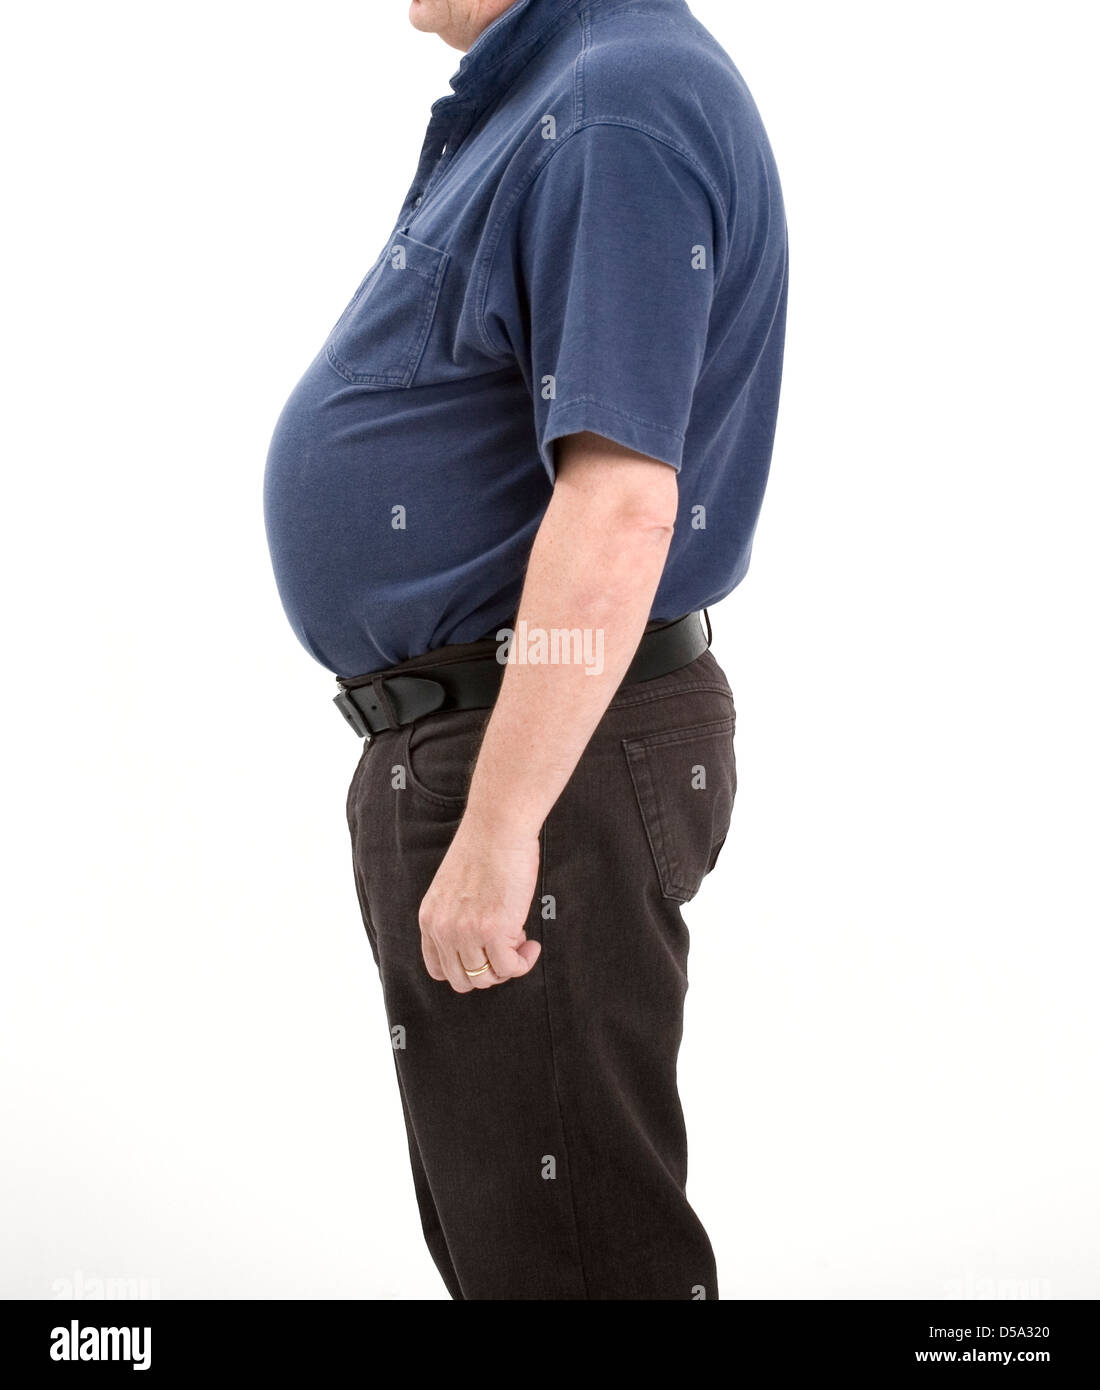 man with beer belly Stock Photo